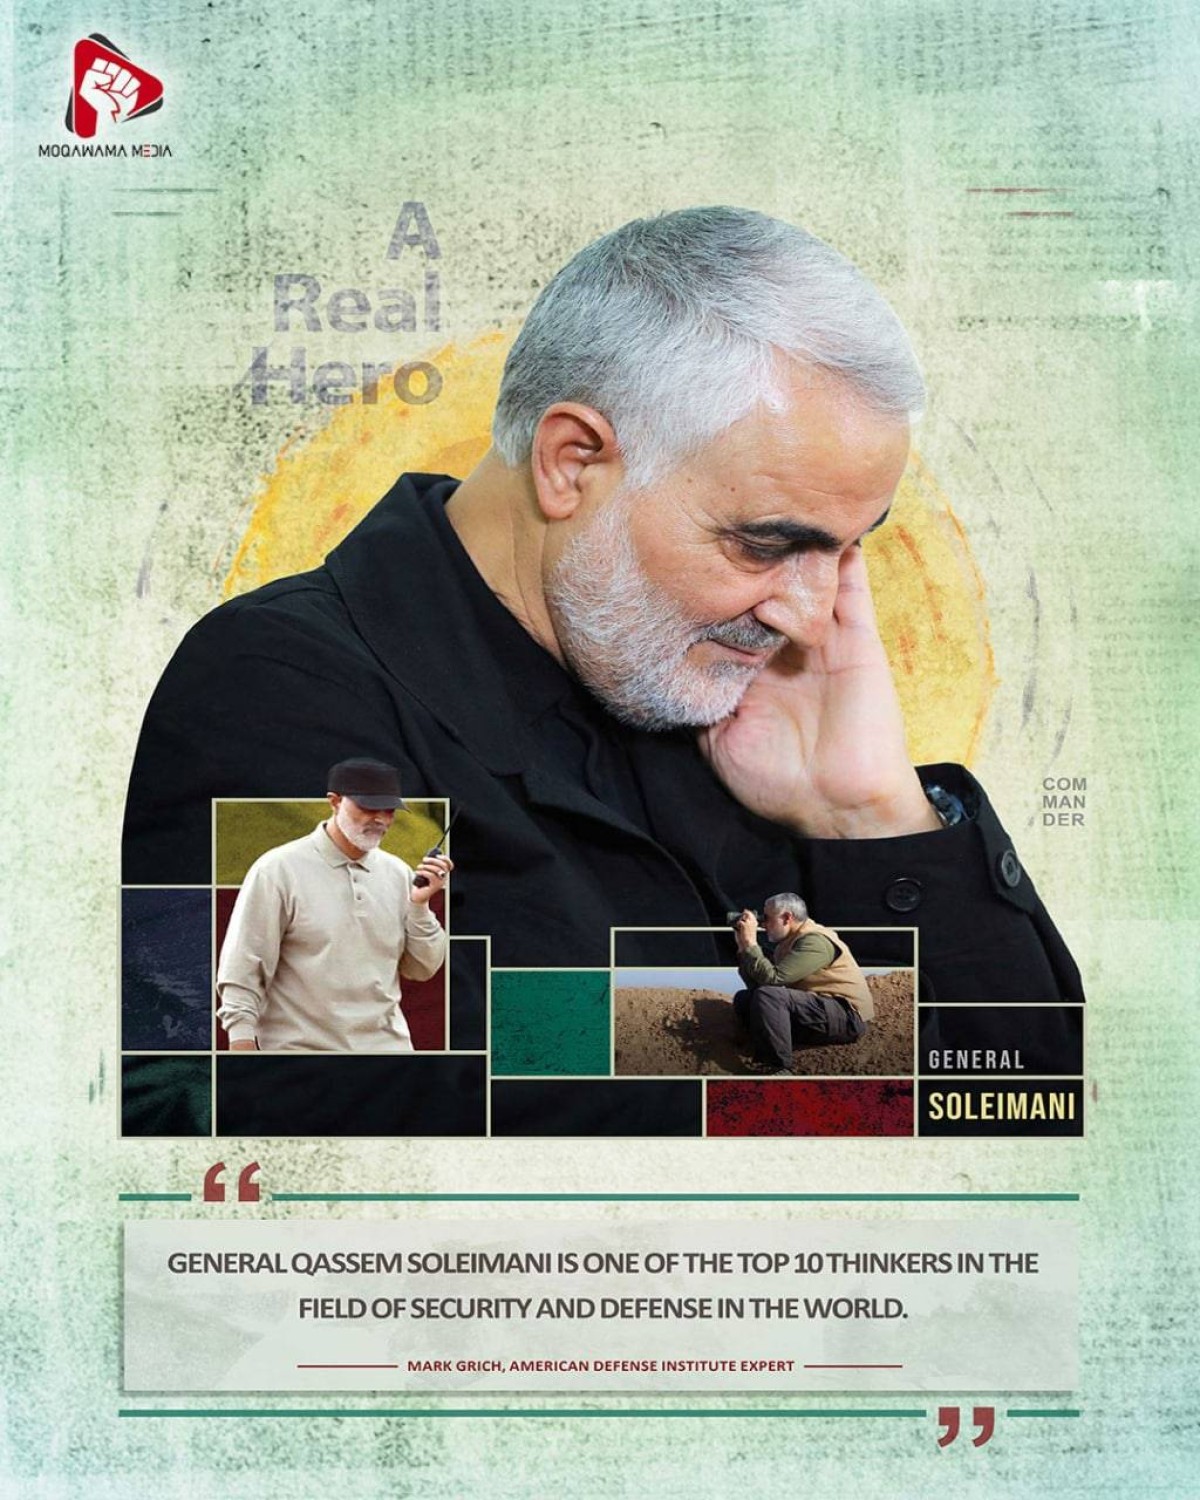  Martyr Soleimani from the Point of View of Western Authorities